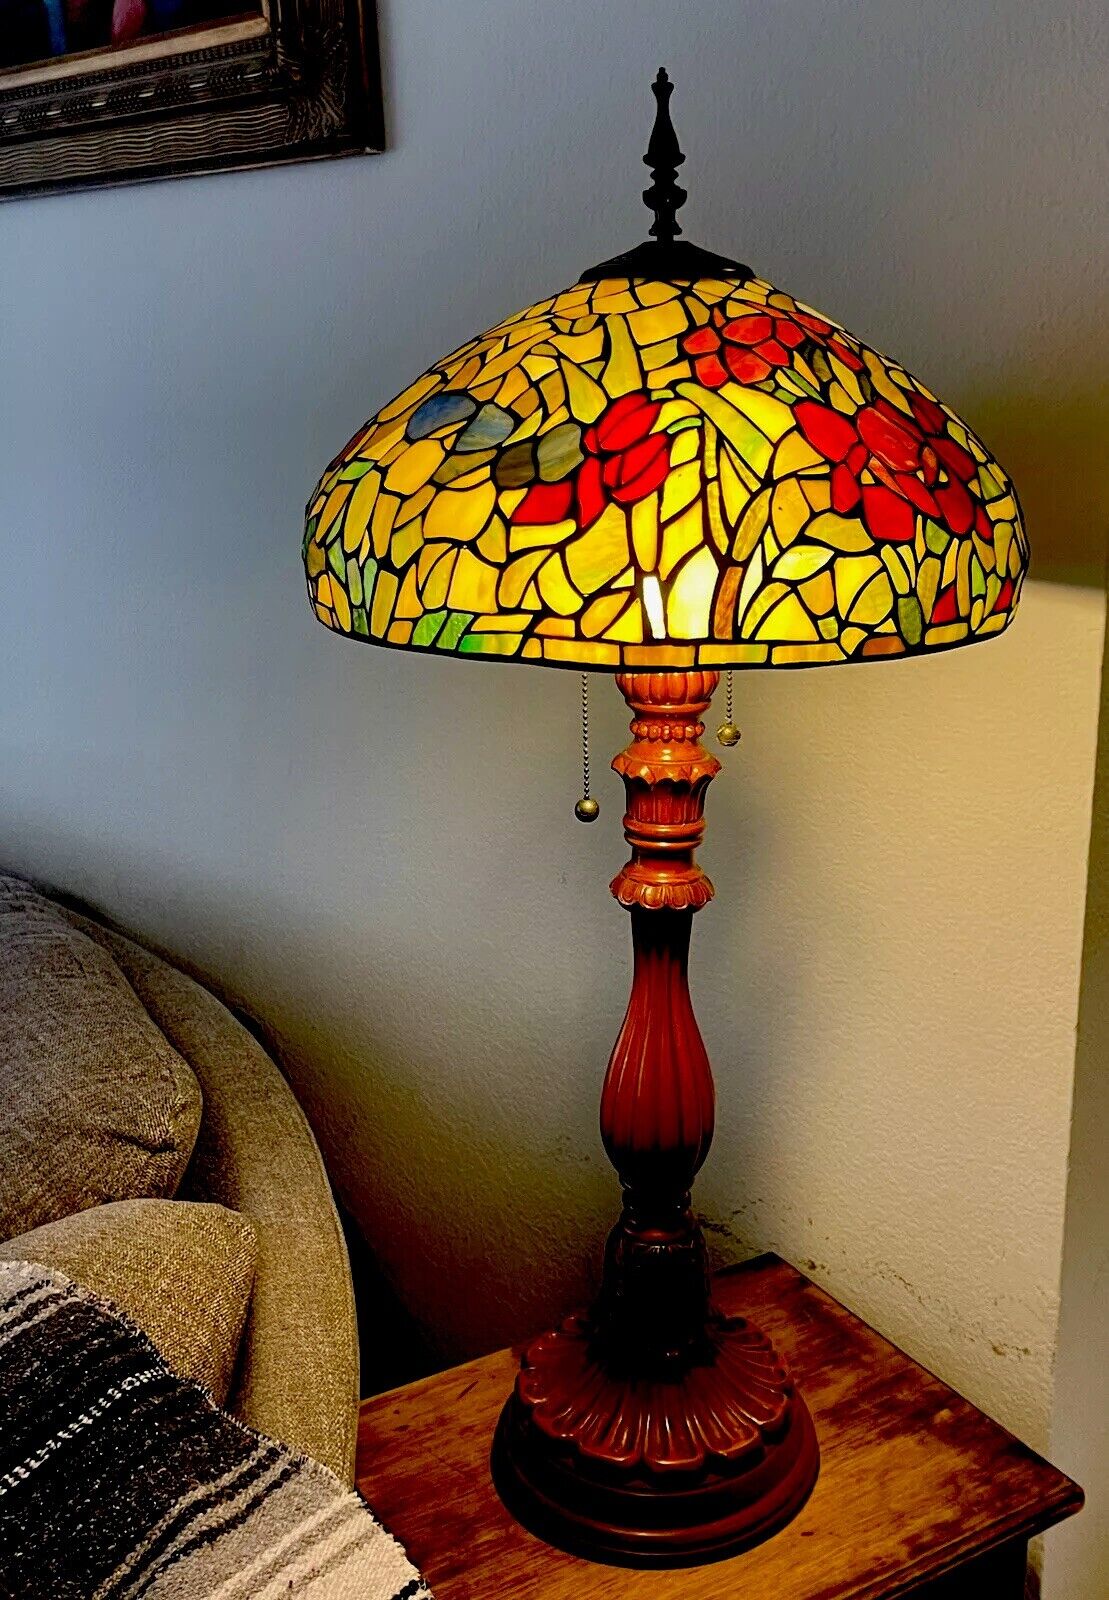 Vintage LargeColorful Floral Tiffany Lamp 39” With 3 Light Bulbs Rare Wood Base